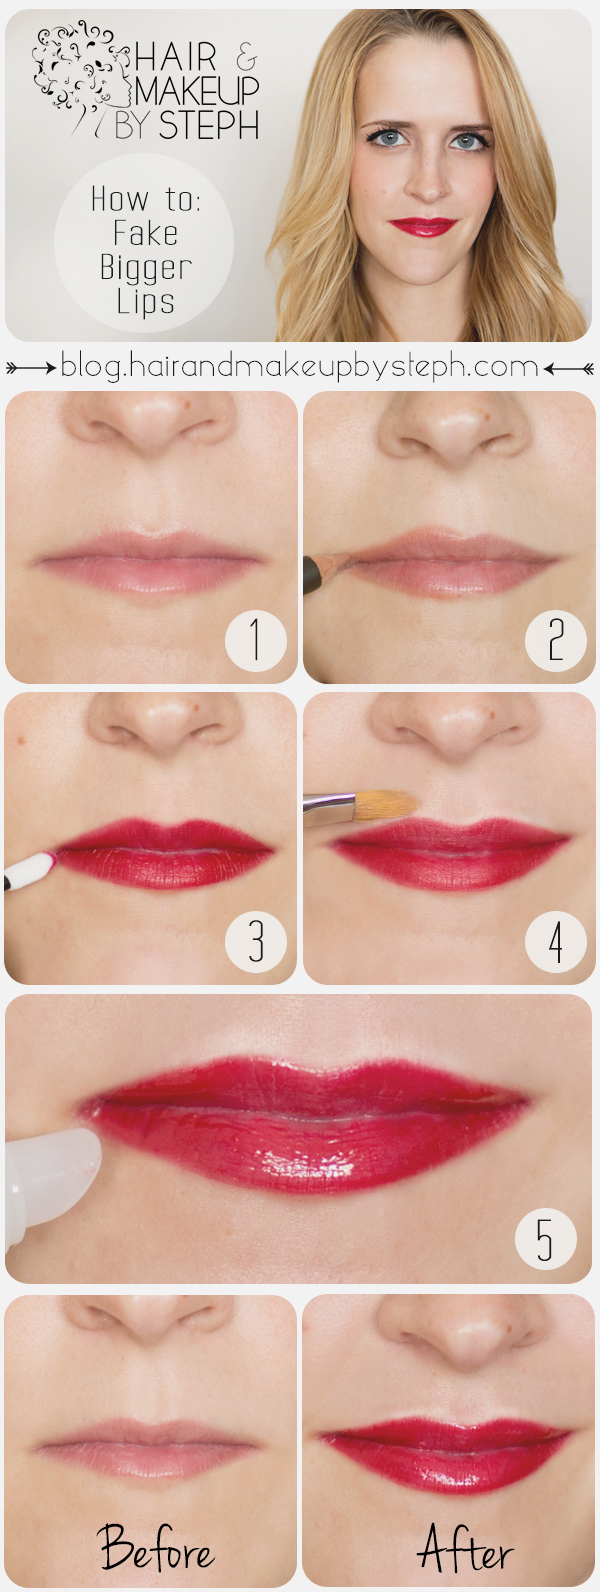 Useful Makeup Tutorials for Sophisticated Looks: Radiant Lip